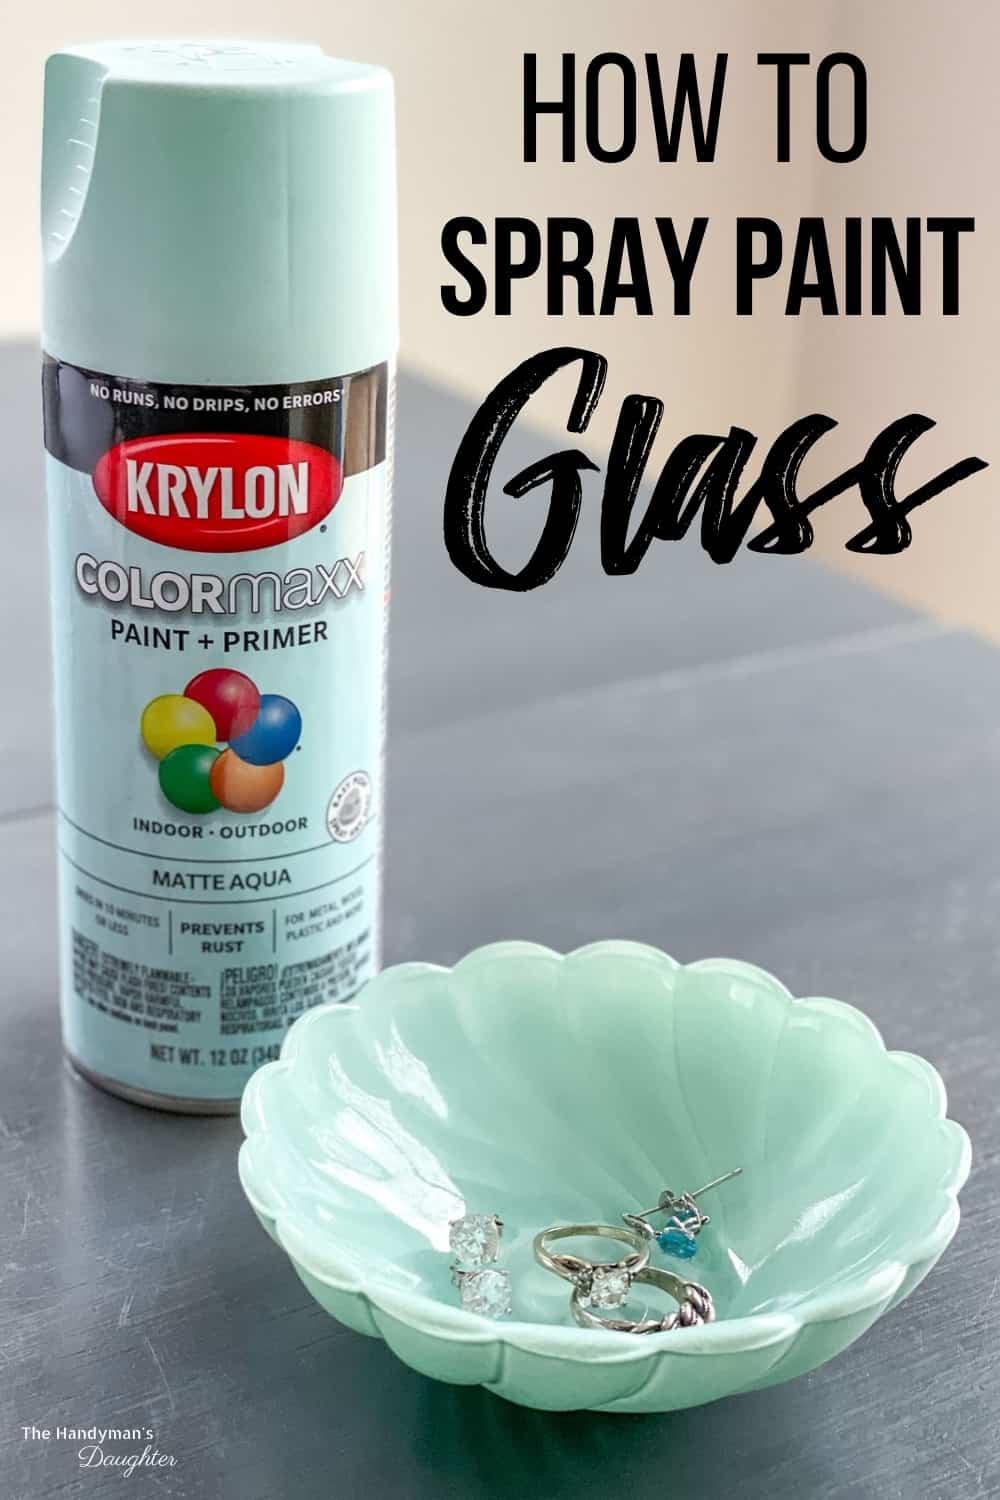 How to spray paint glass